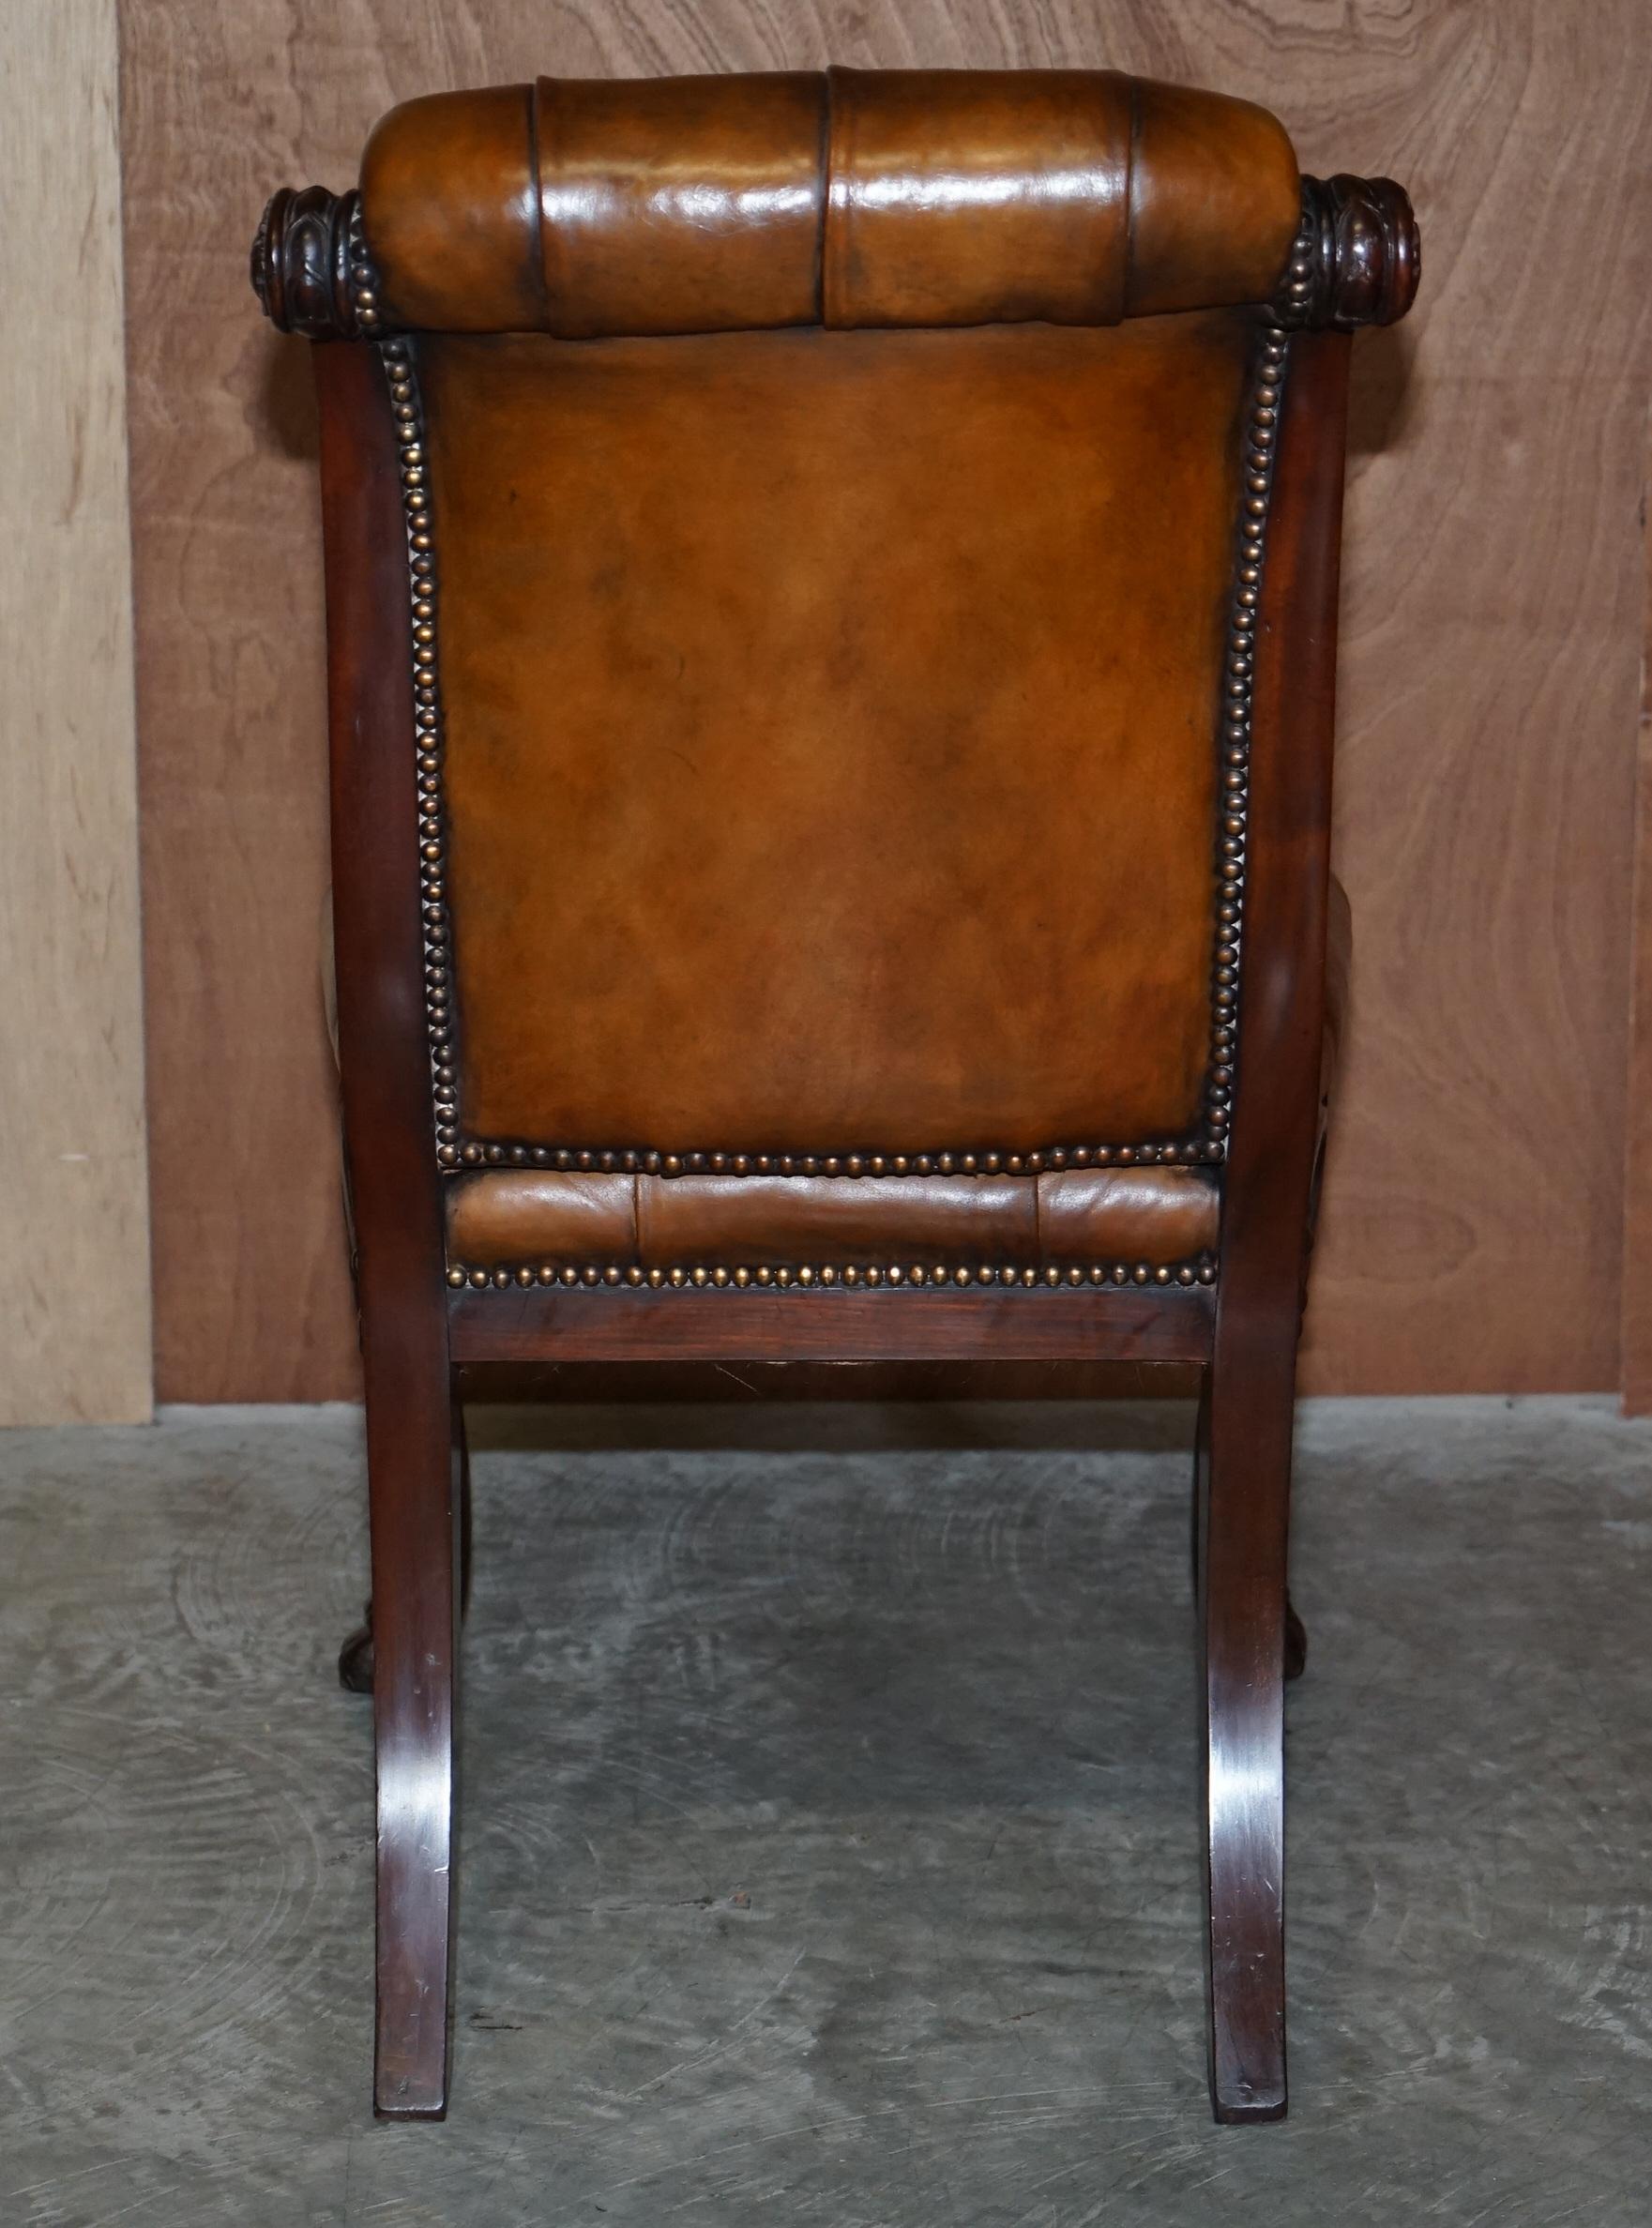 circa 1845 C Hindley & Sons Lion Carved Chesterfield Brown Leather Dining Chairs For Sale 12